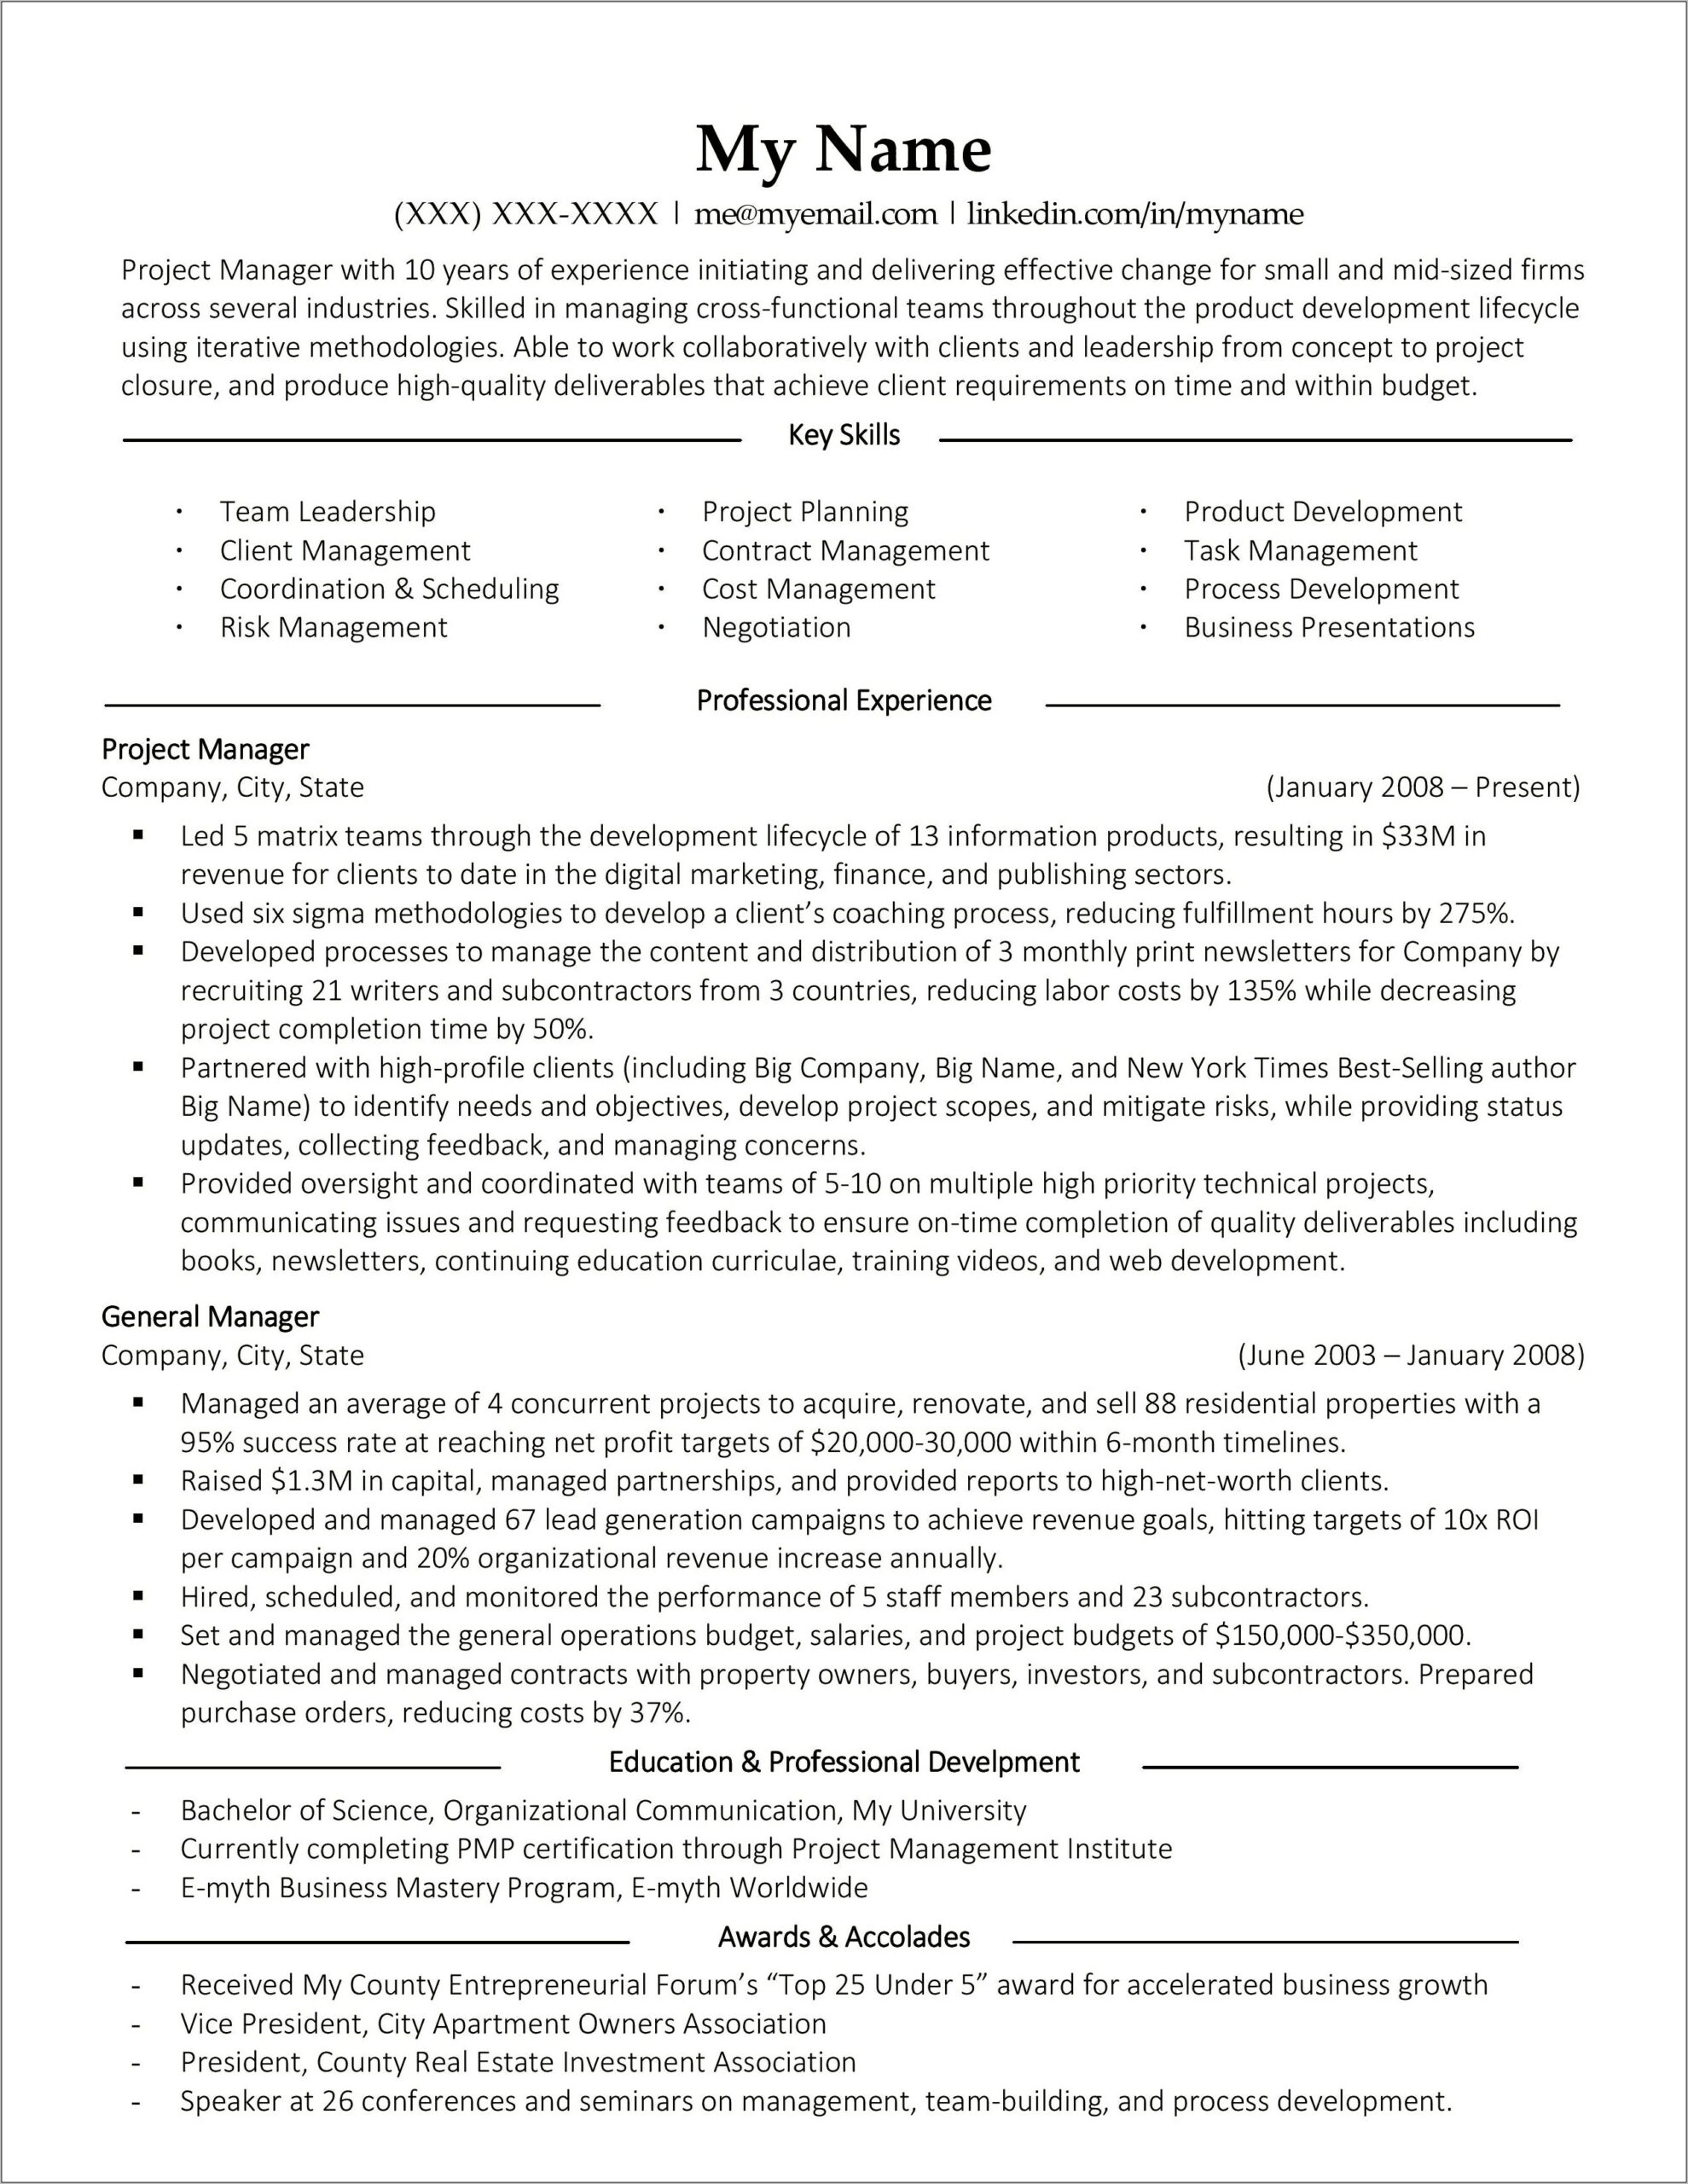 Technical Project Manager Role Resume